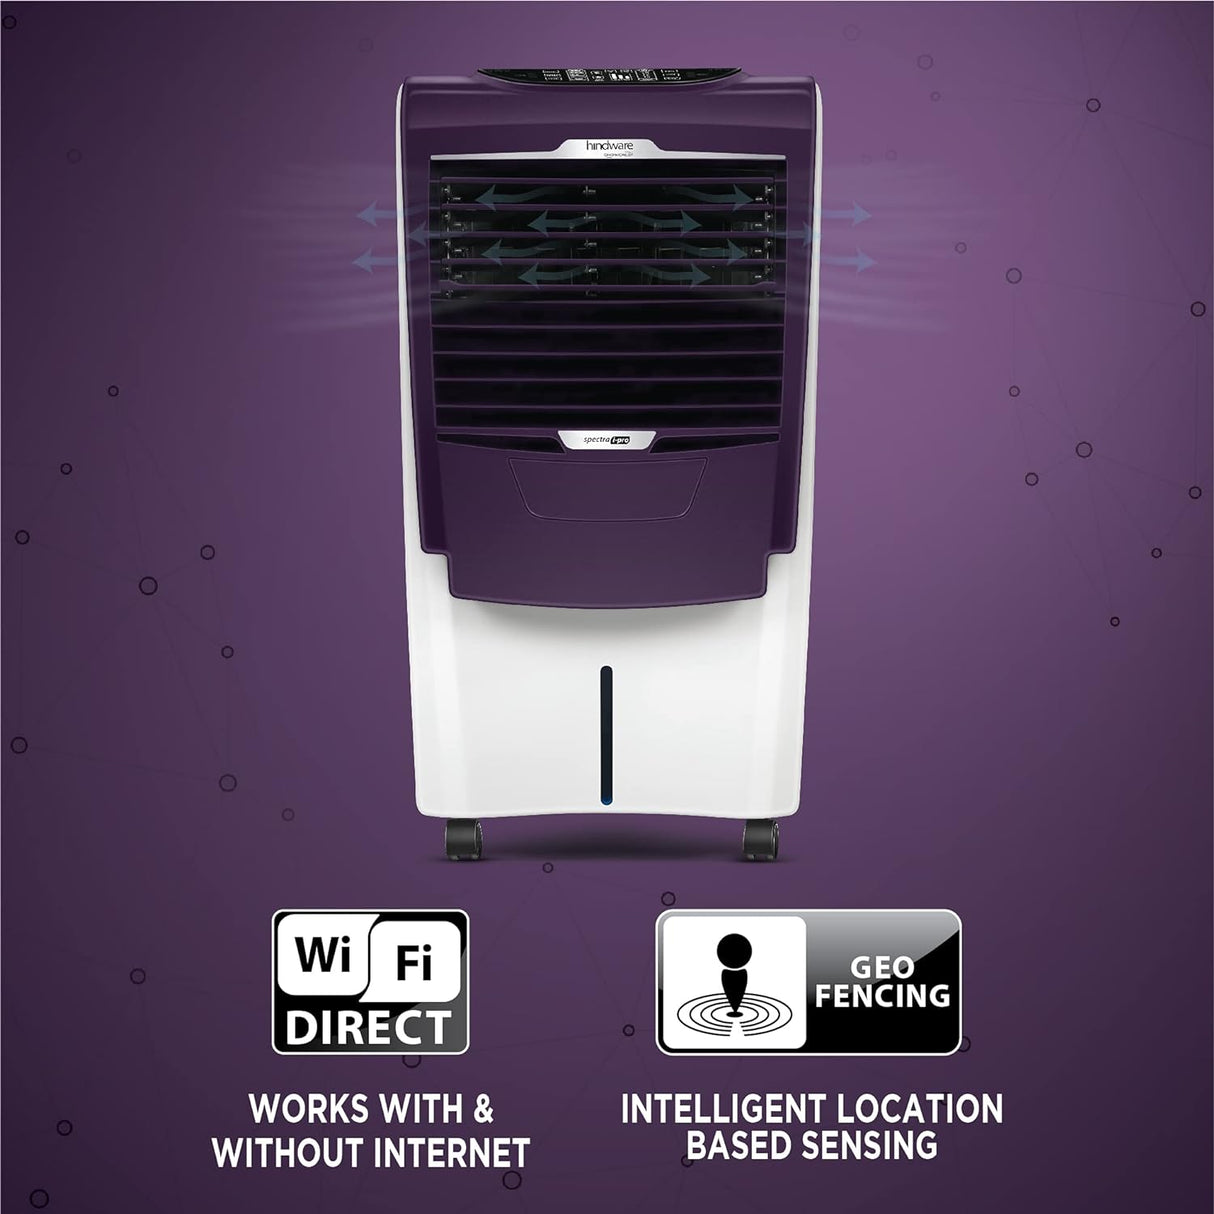 Hindware Smart Appliances SPECTRA i-Pro 36L Personal Air Cooler with IOT technology, Smart Touch Display, Gesture & Mobile App Controls, voice control, Inverter Compatible (Purple)